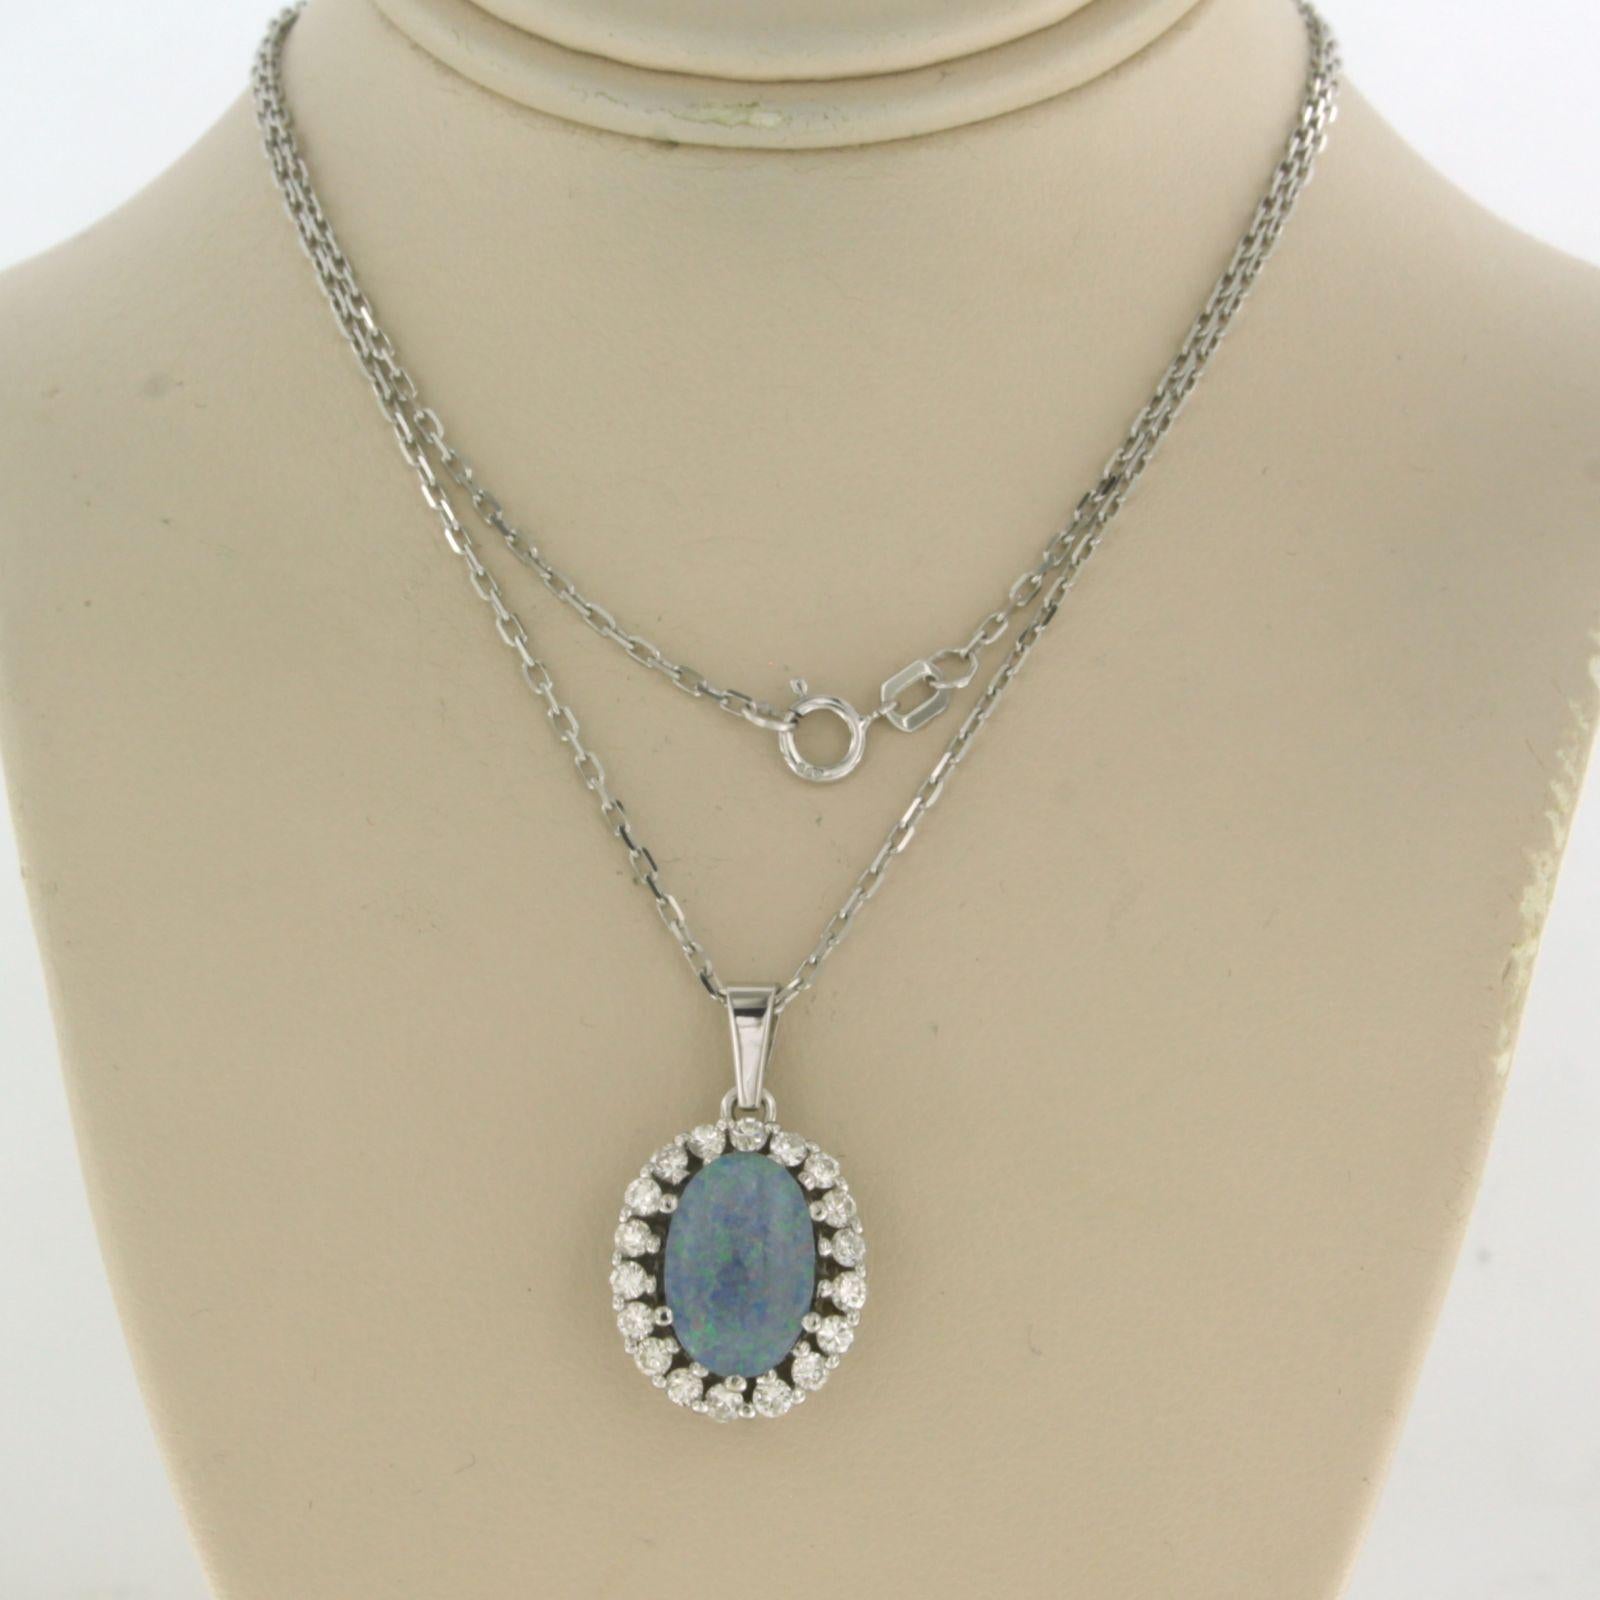 Modern Necklace and pendant set with opal and diamond 14k white gold